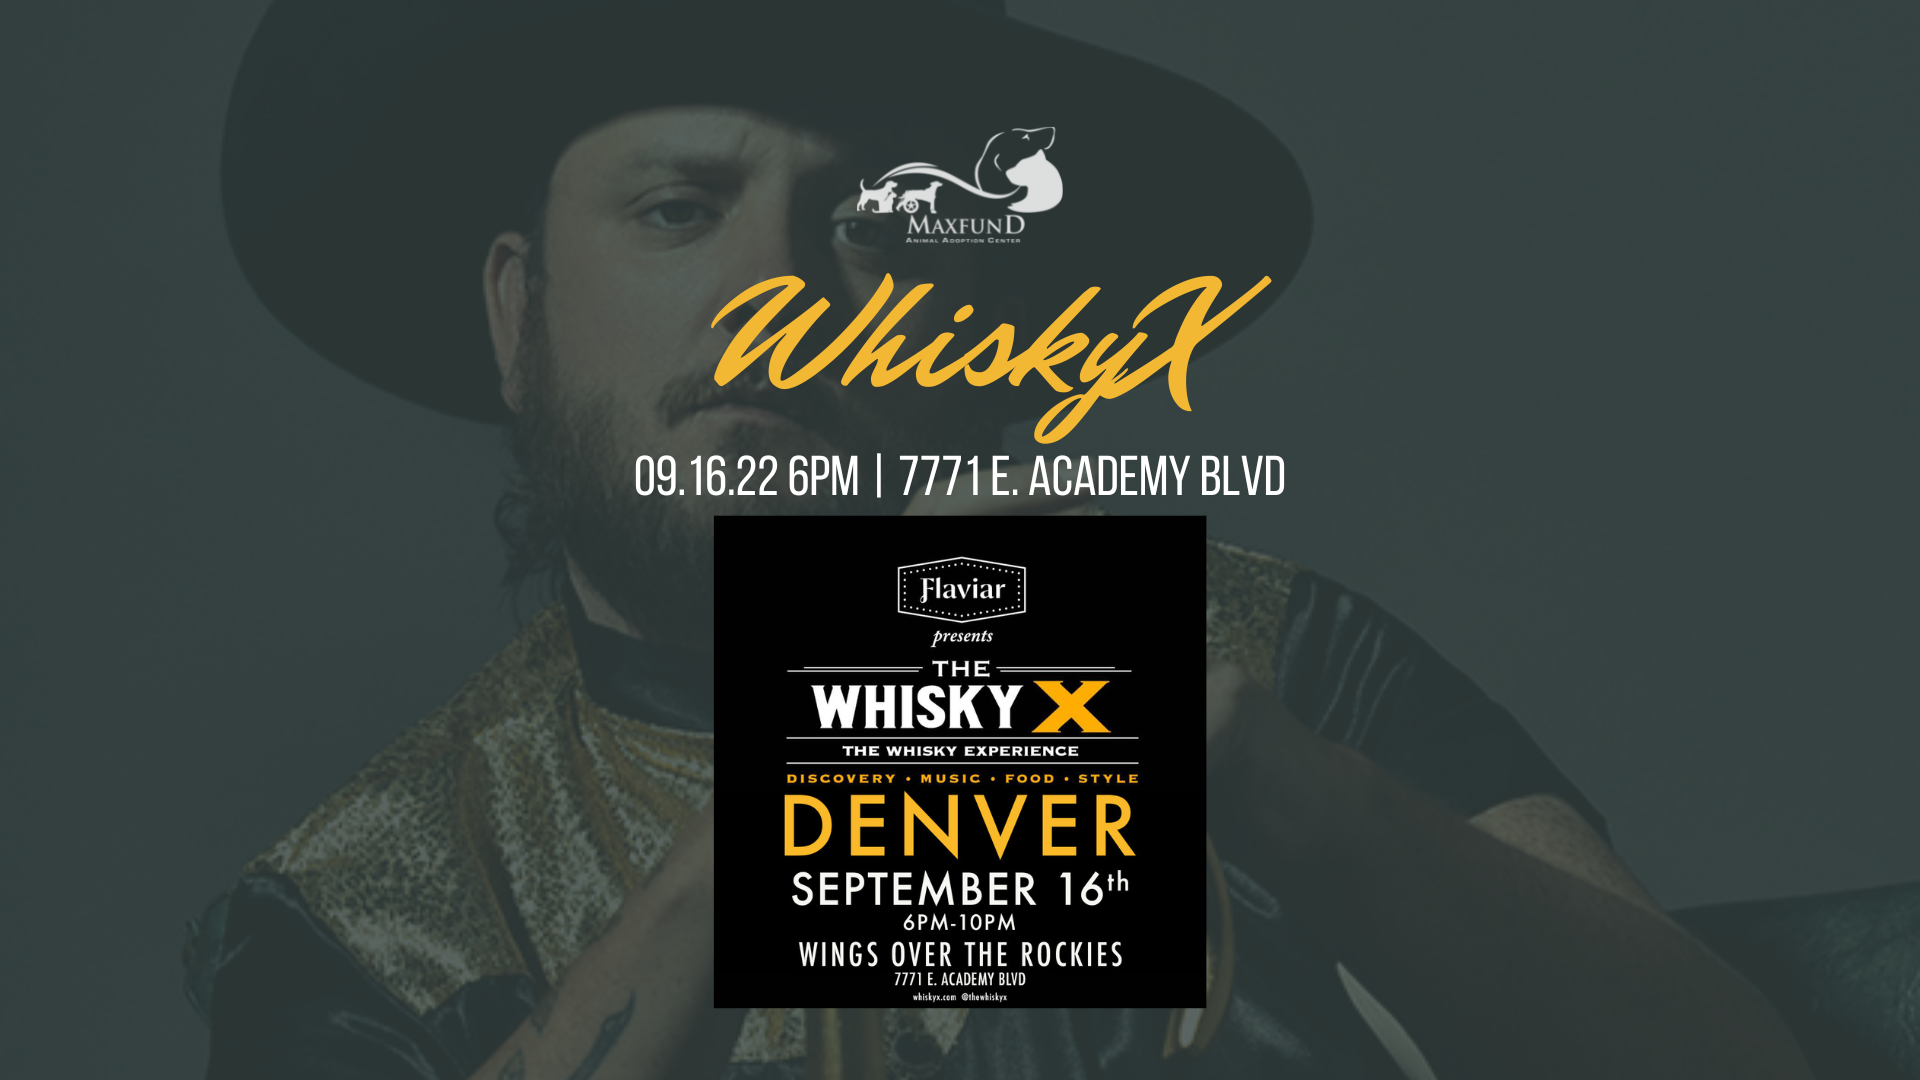 
WhiskyX: The Whisky Experience